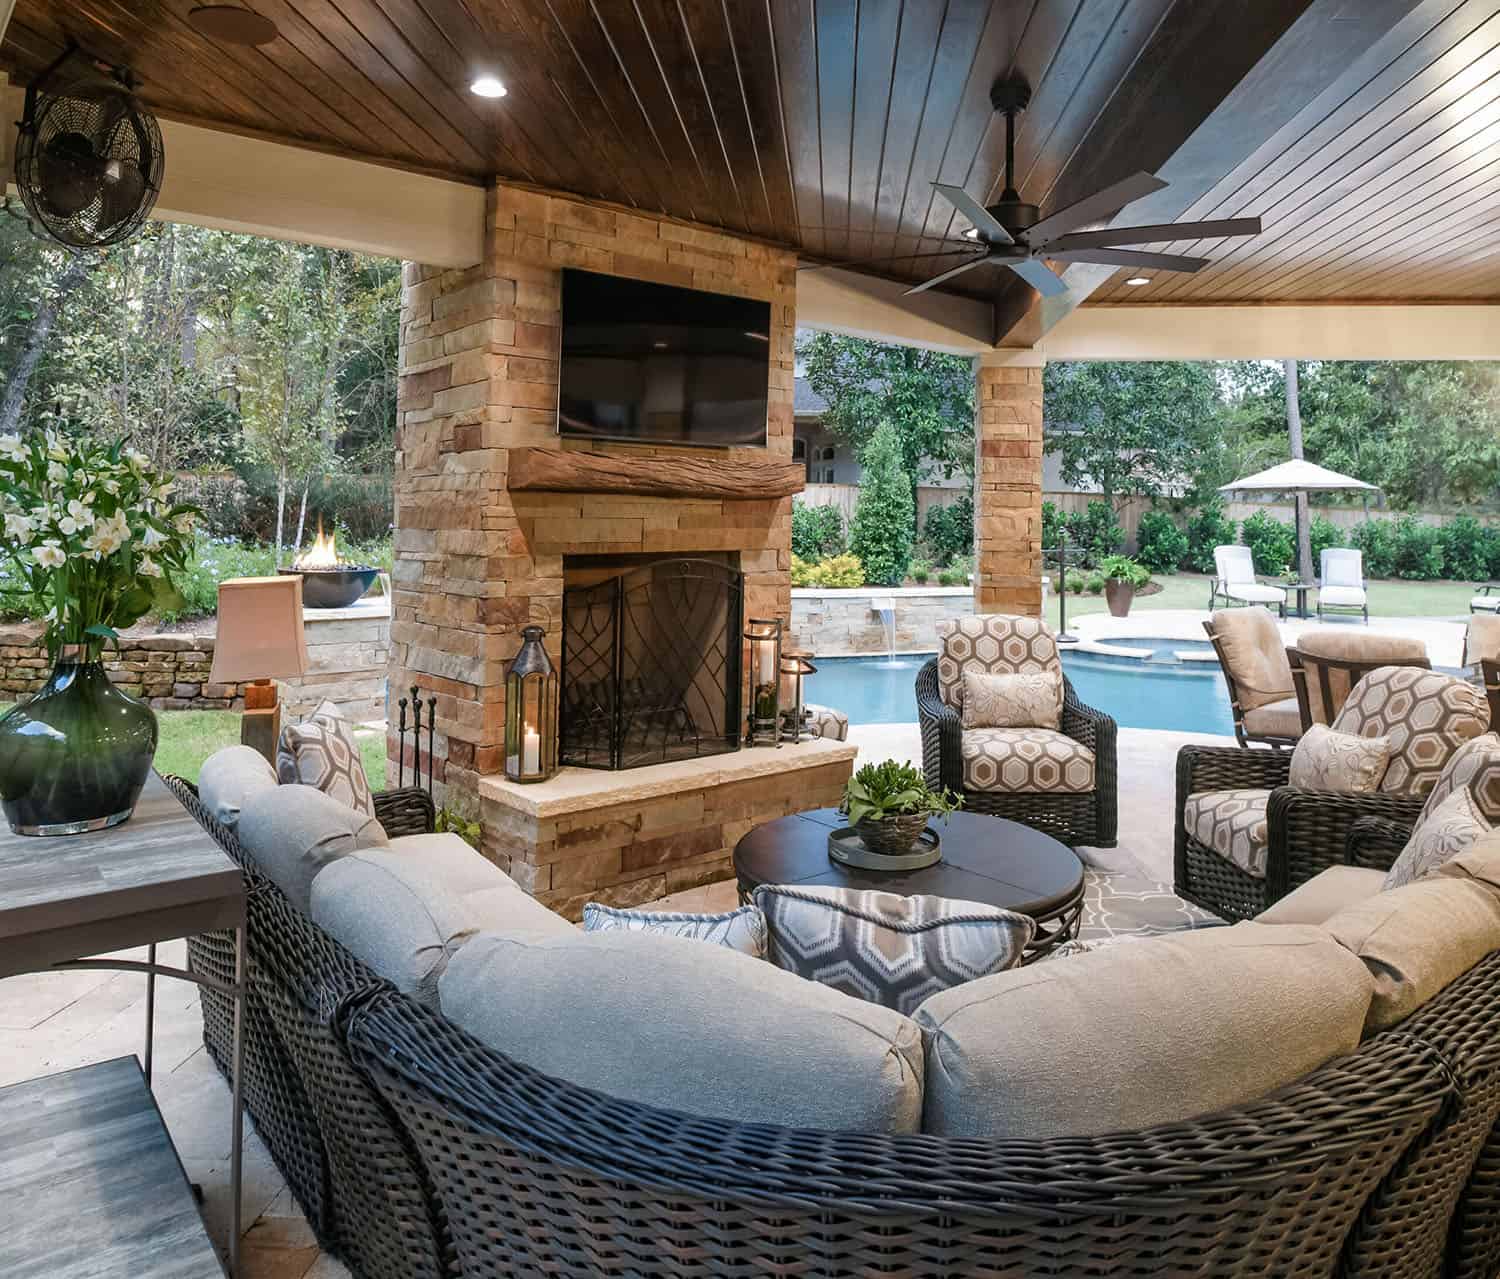 transitional-style-home-patio-outdoor-living-room